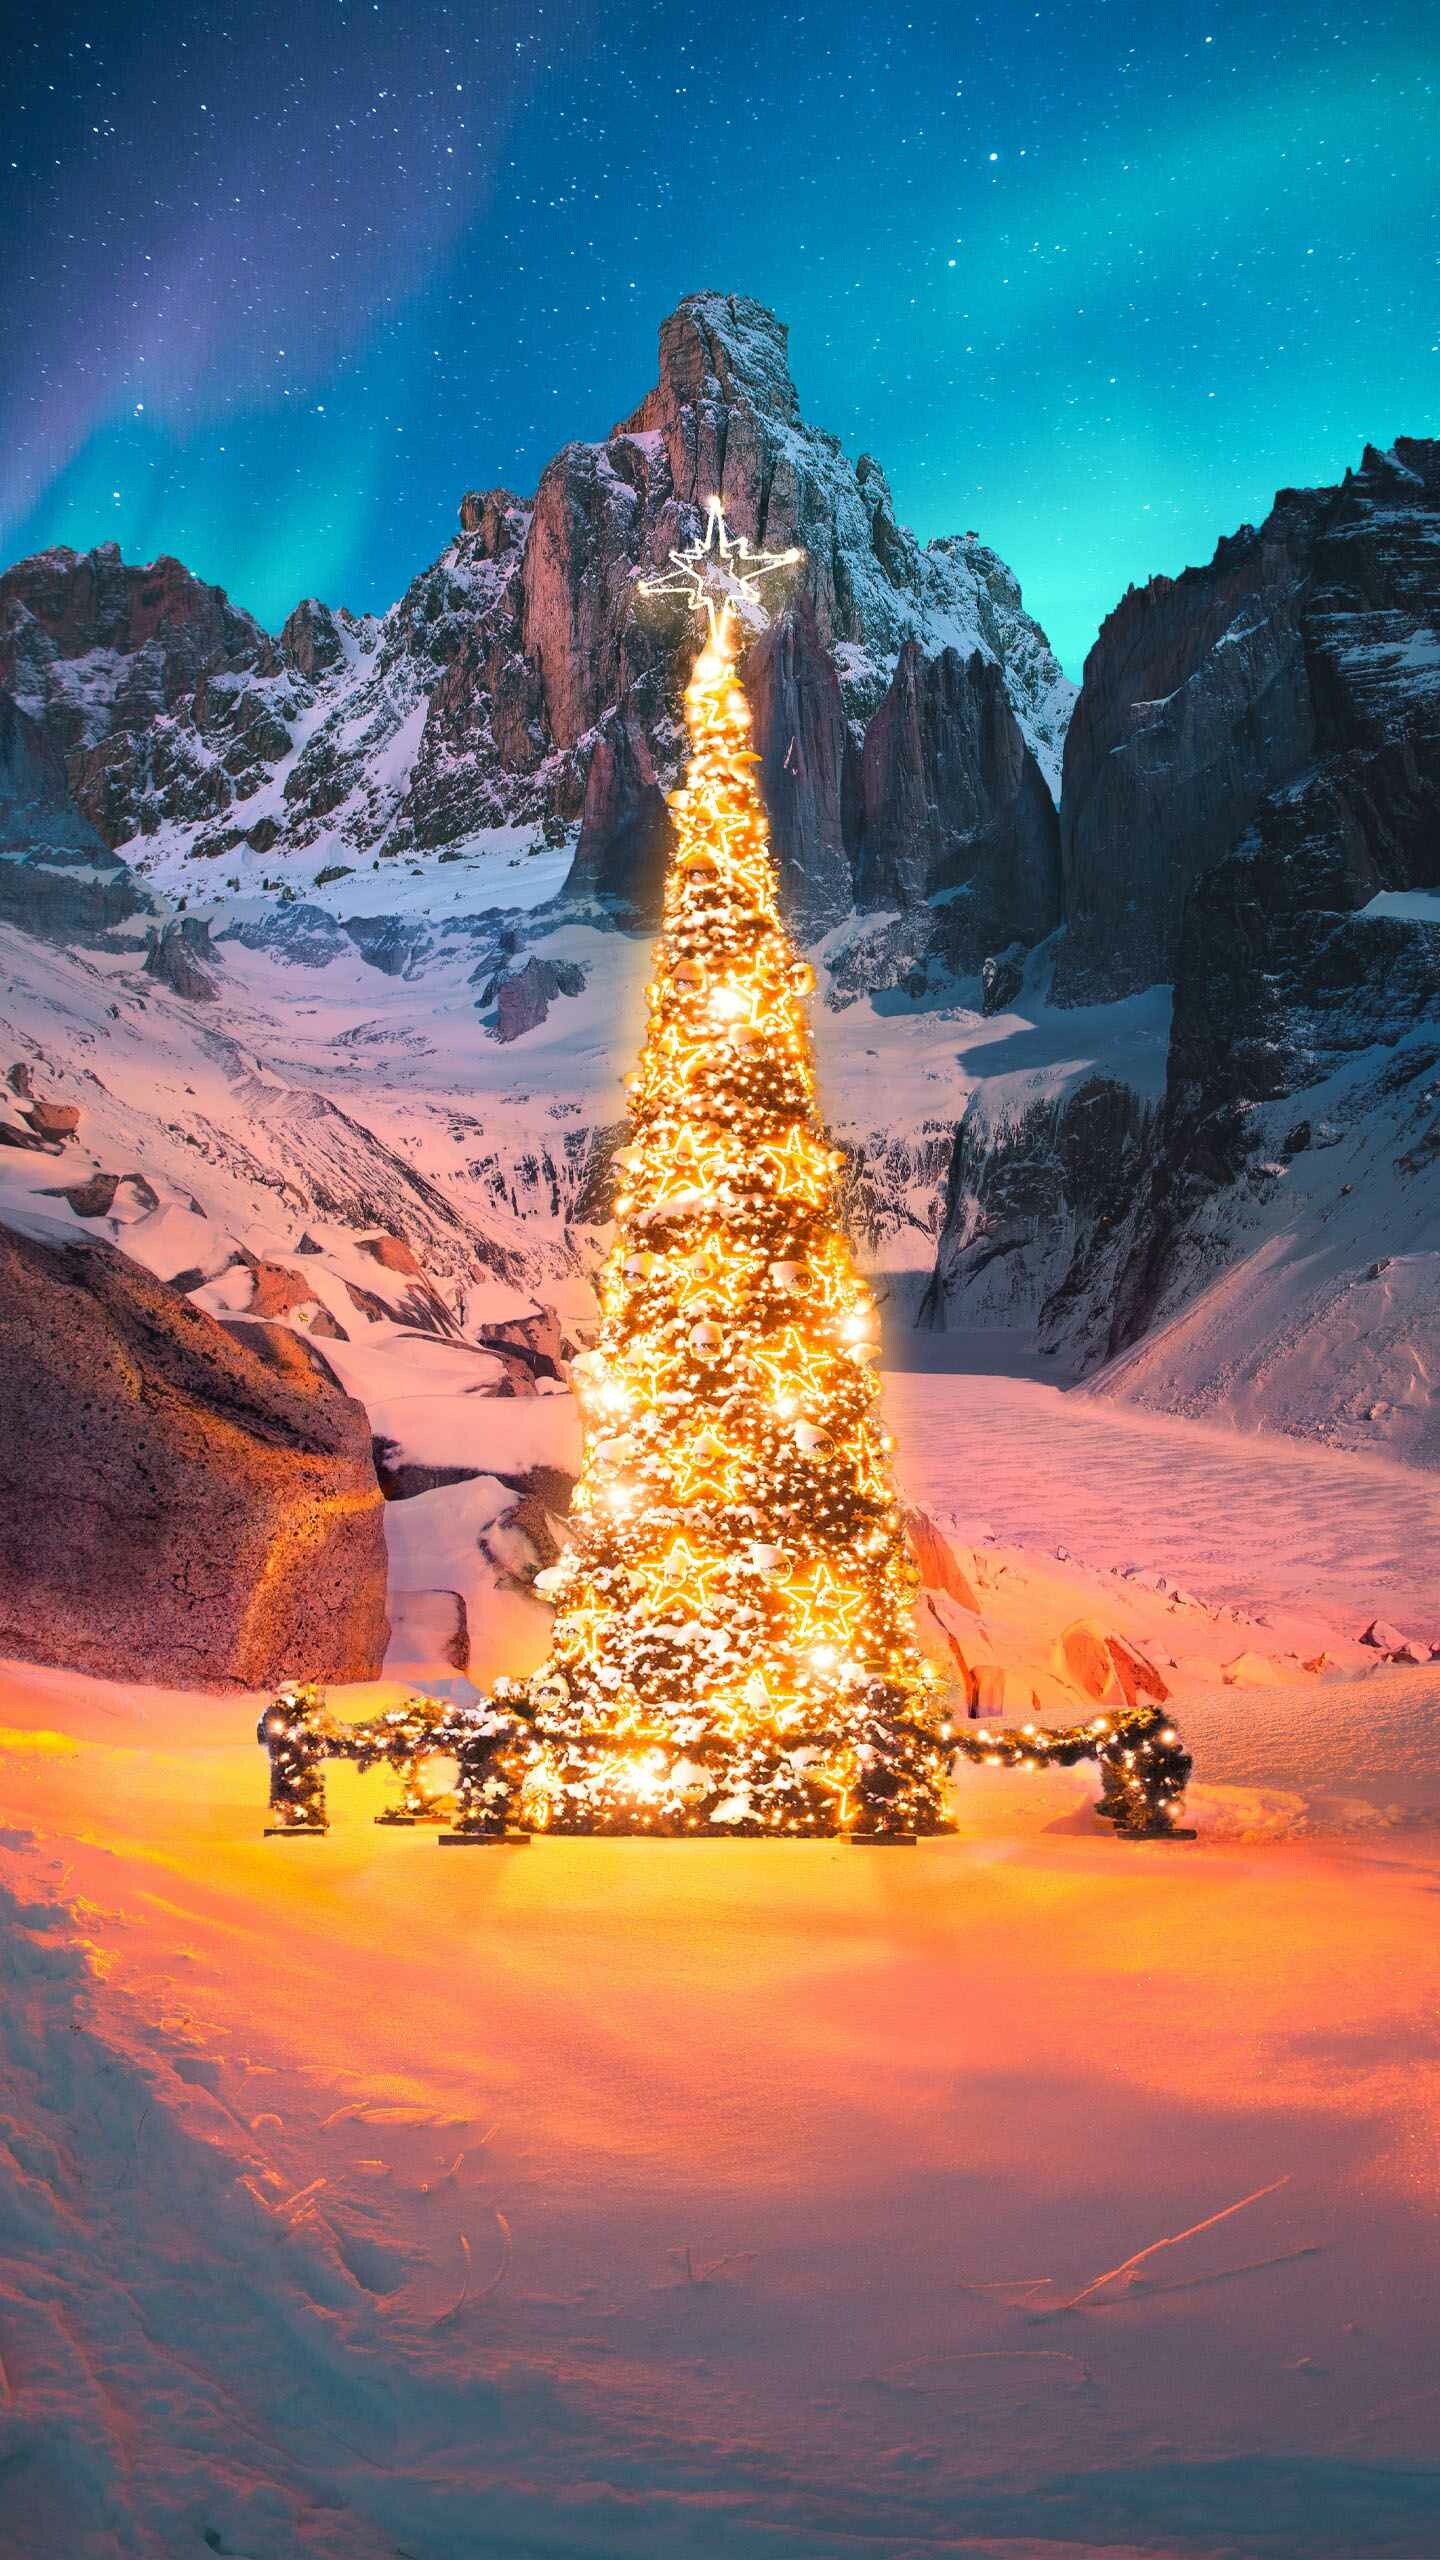 Christmas Tree: An angel or star might be placed at the top, Holidays. 1440x2560 HD Wallpaper.